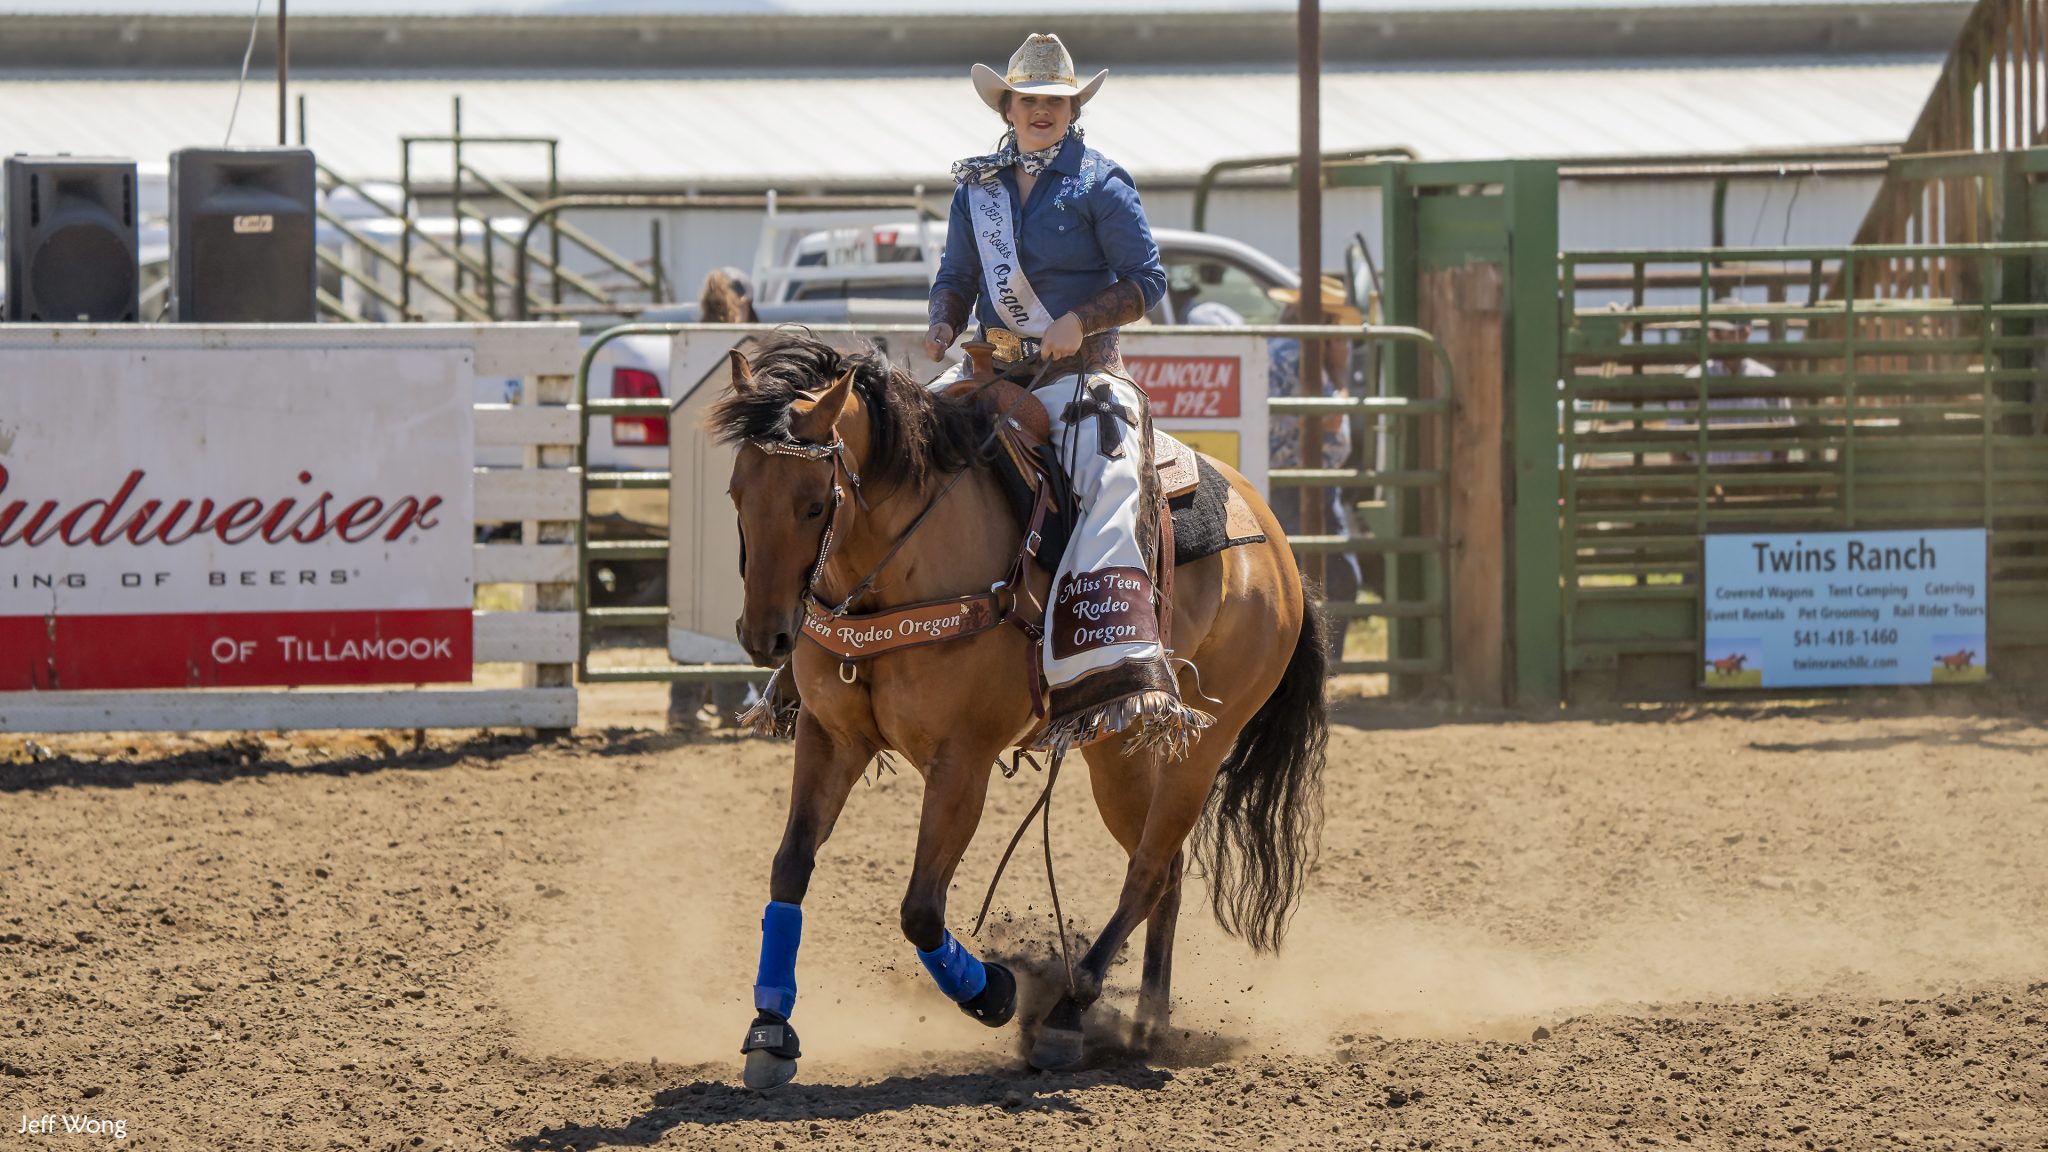 Pageants Miss Rodeo Oregon